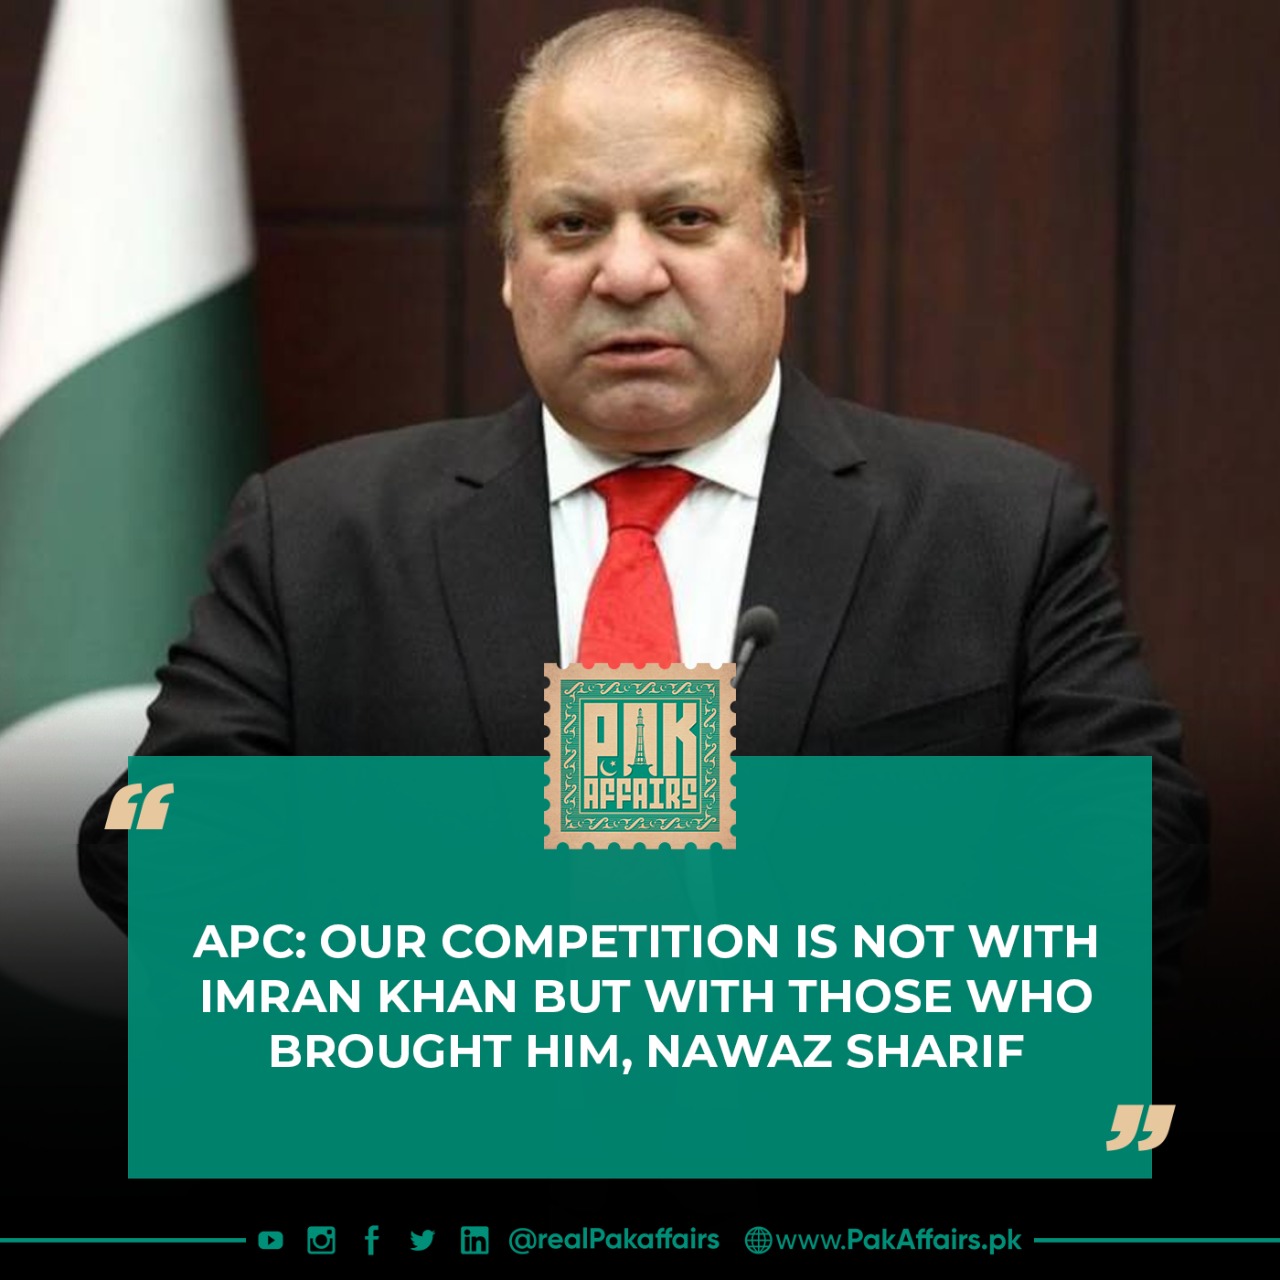 APC: Our competition is not with Imran Khan but with those who brought him, Nawaz Sharif